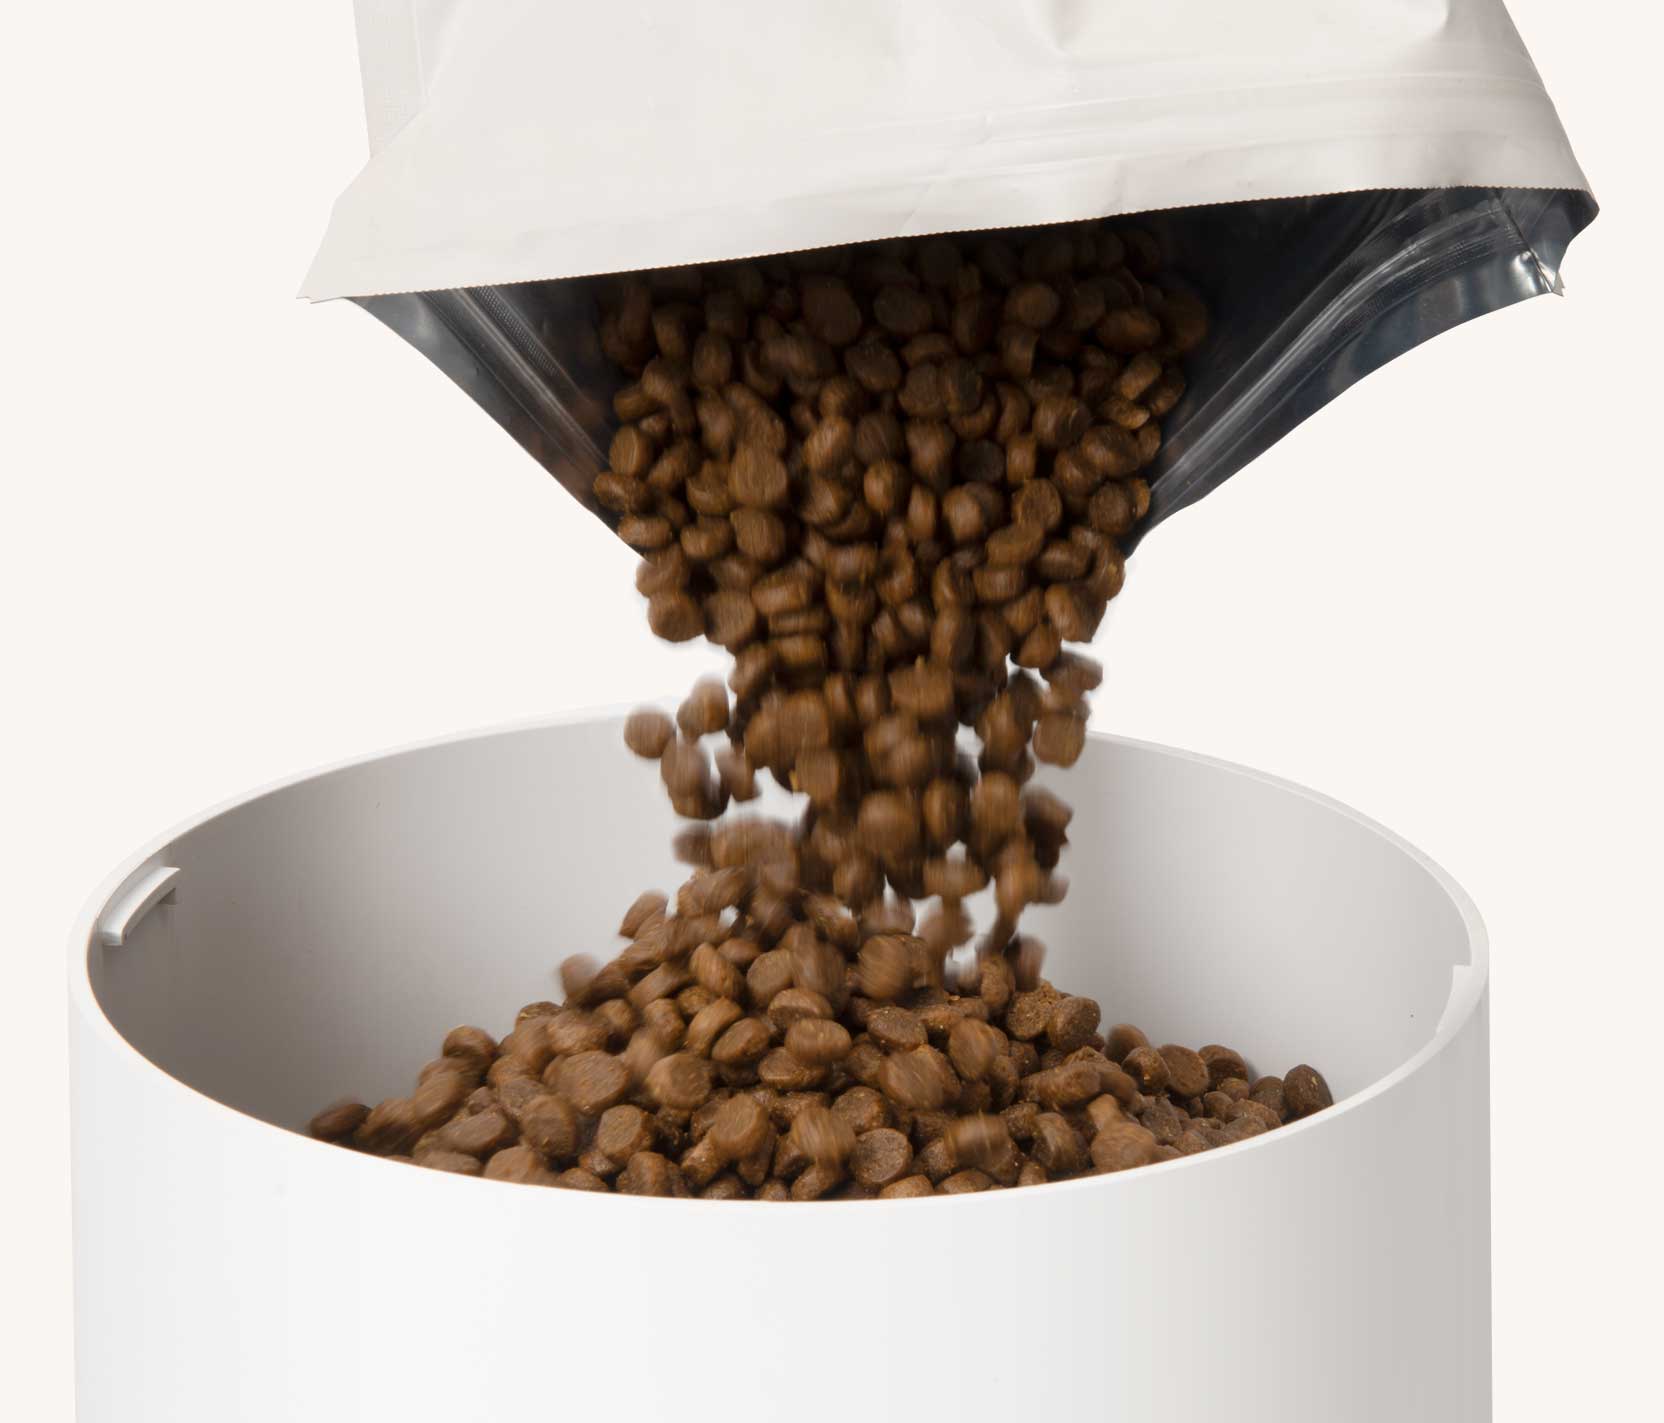 Cat feeder built to store cat food in optimal conditions and preserve food freshness